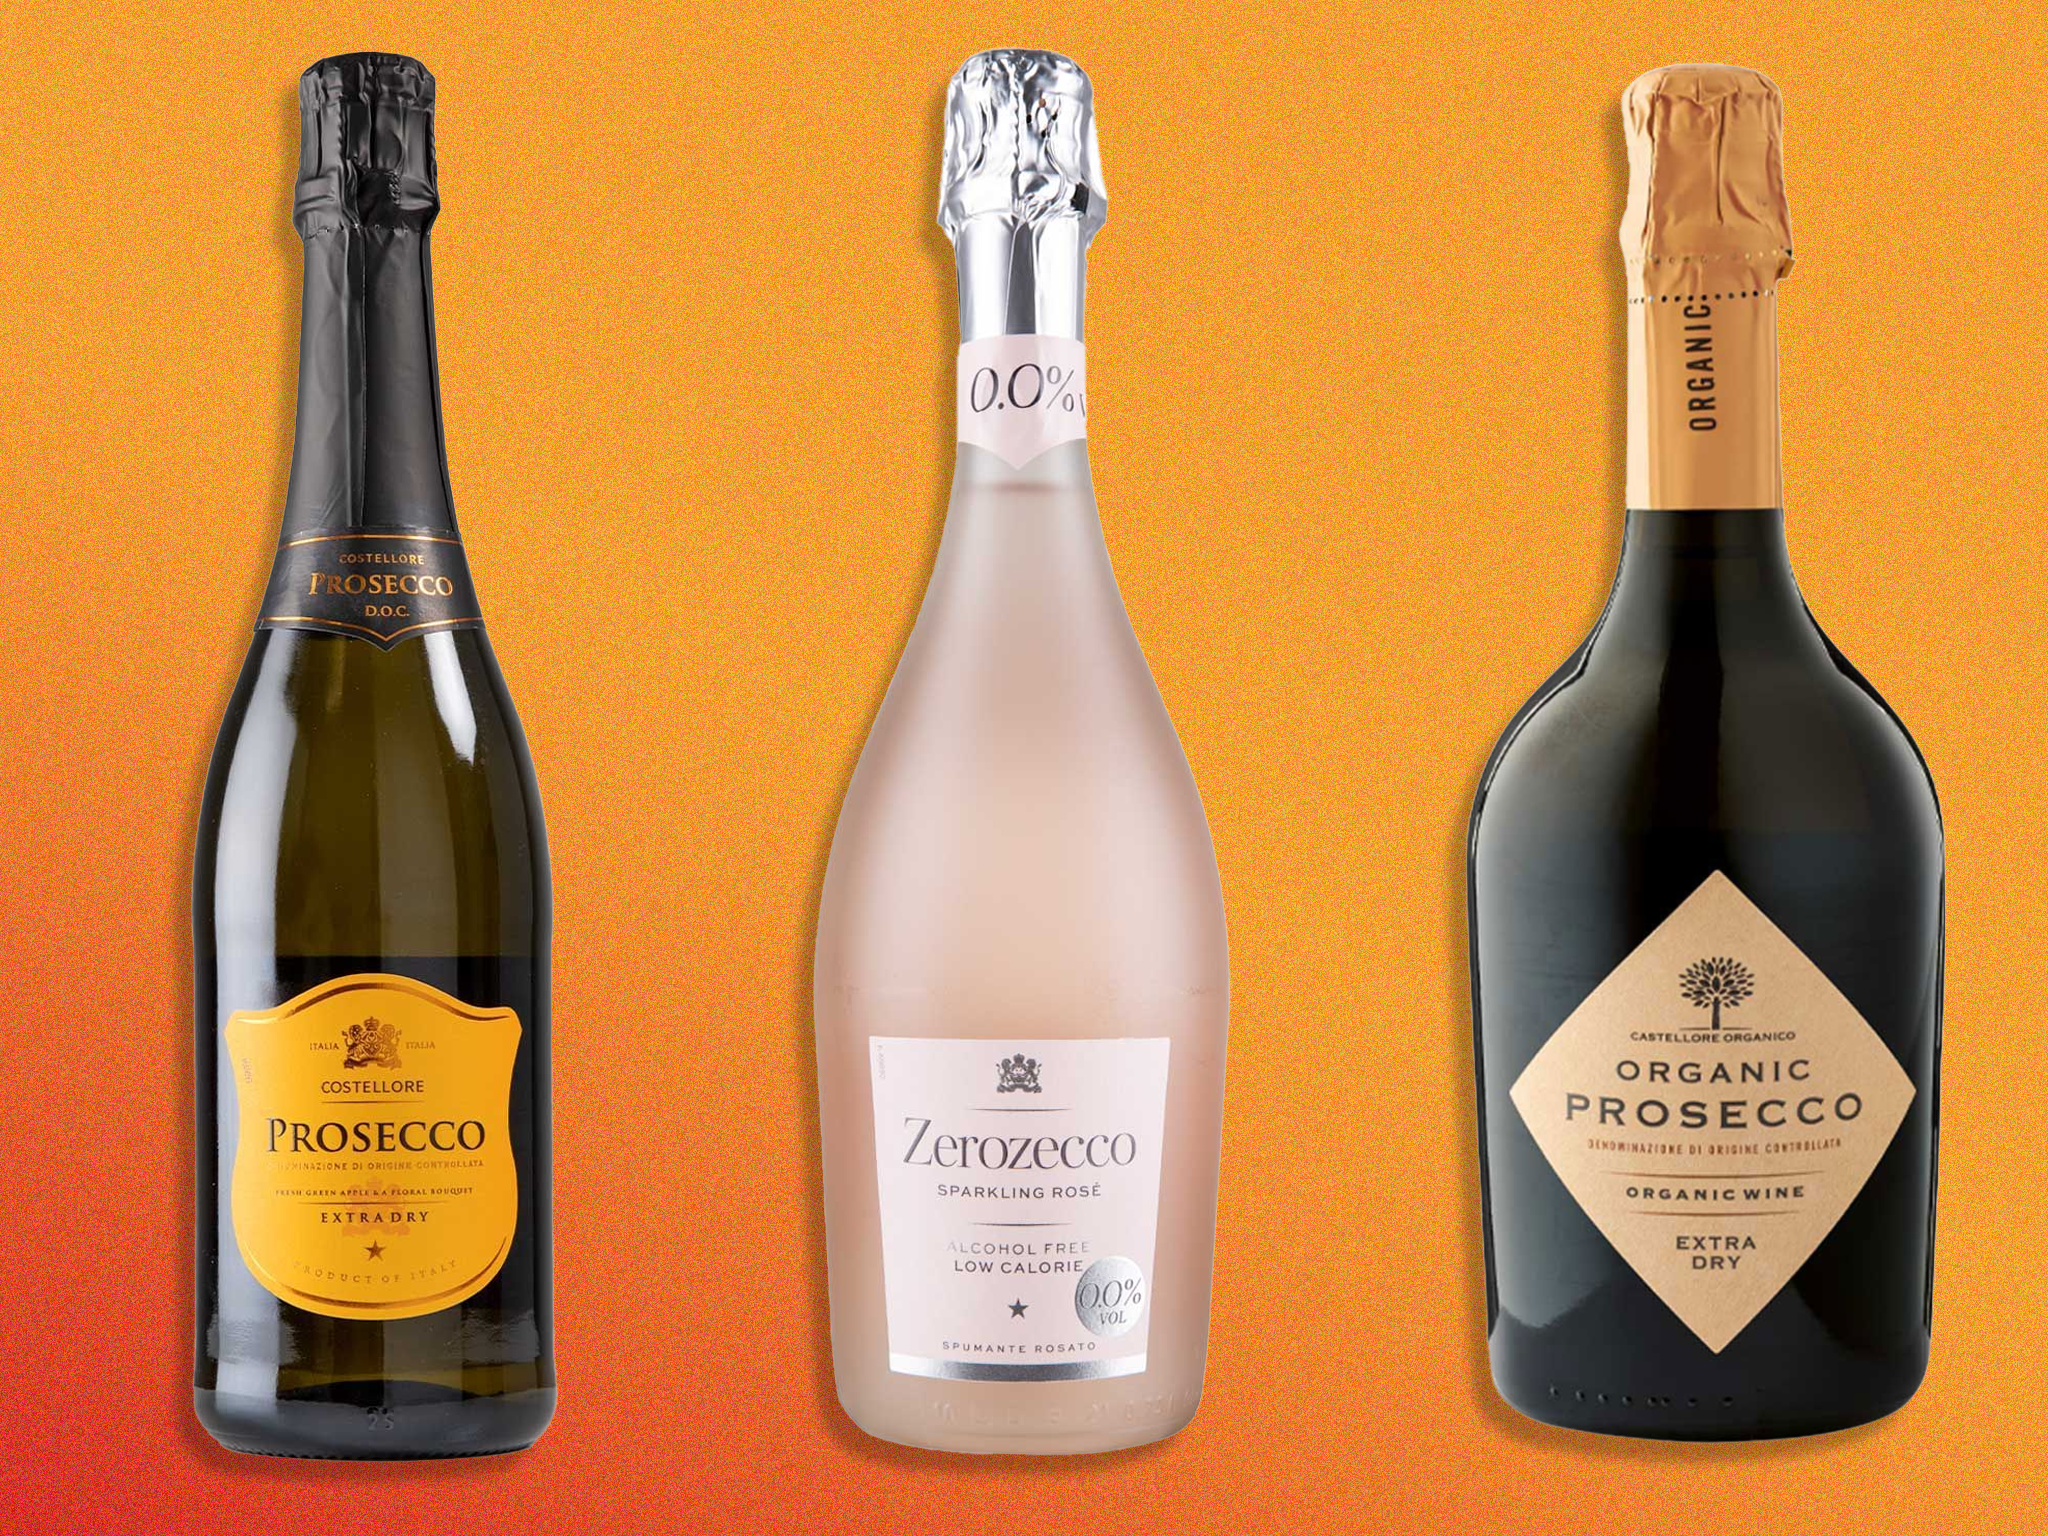 Whether you’re looking for extra dry, classic or rosé, there’s a variety of bottles available